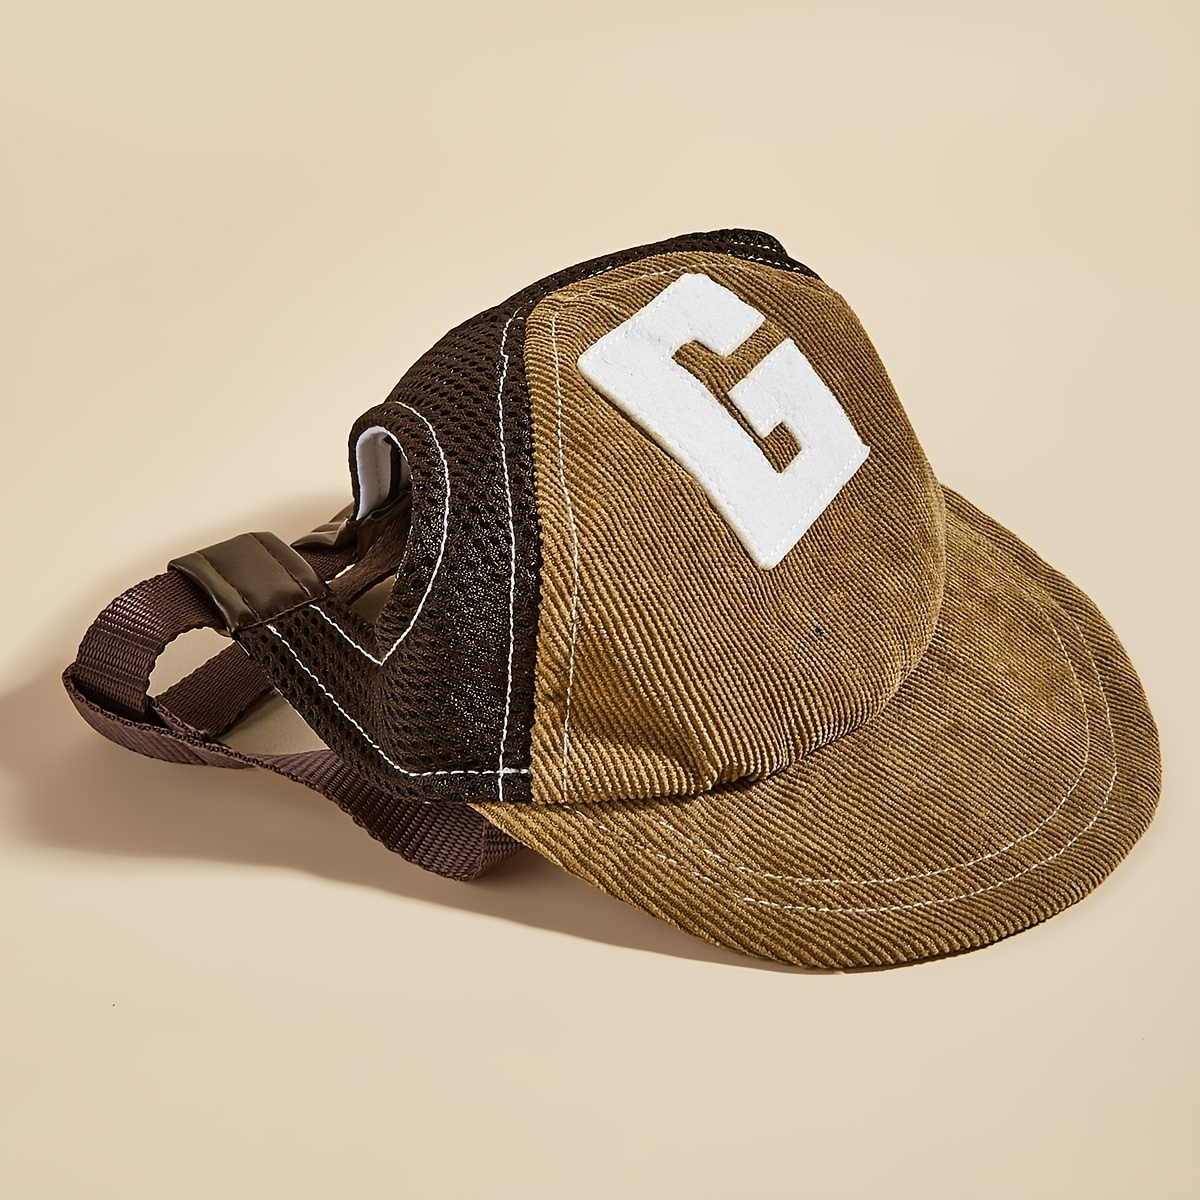 Upgrade Your Dog's Look with This Stylish Brown Sunproof Hat with Letter G  Pattern